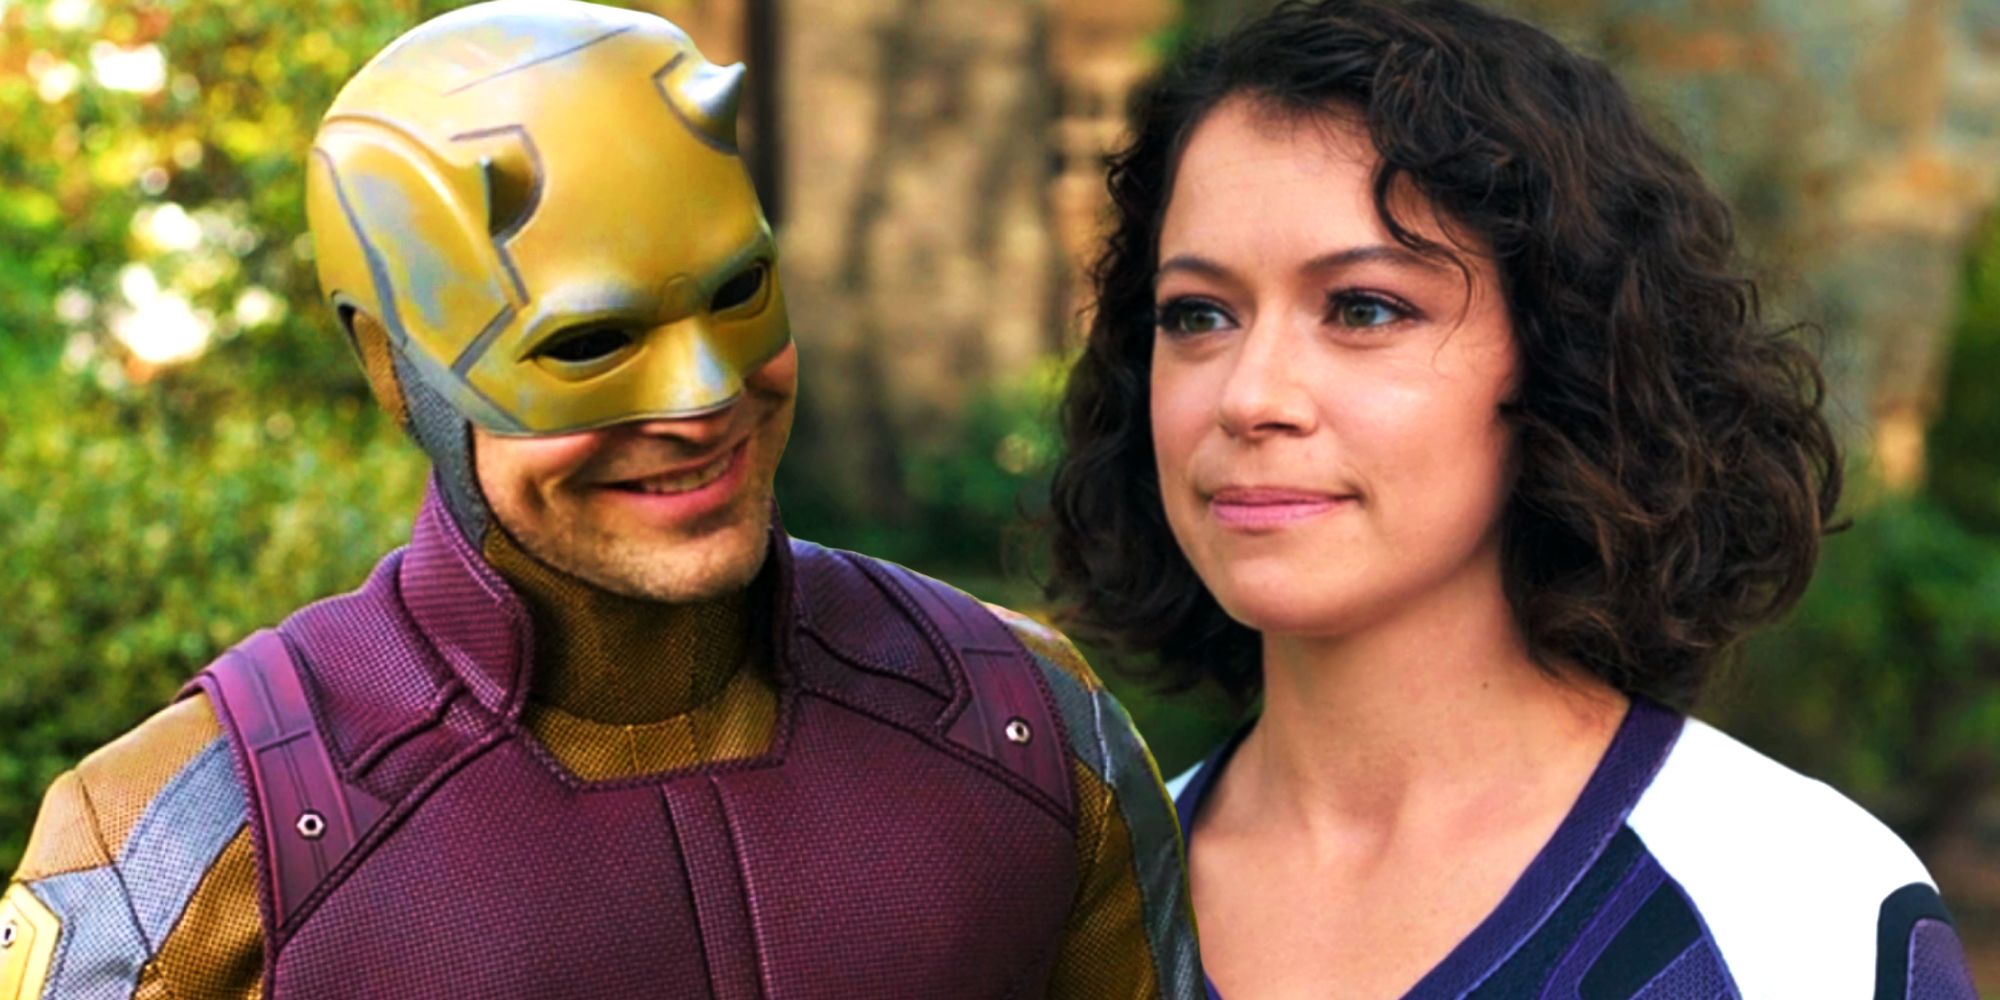 Charlie Cox as Daredevil and Tatiana Maslany as Jen Walters in She-Hulk: Attorney at Law